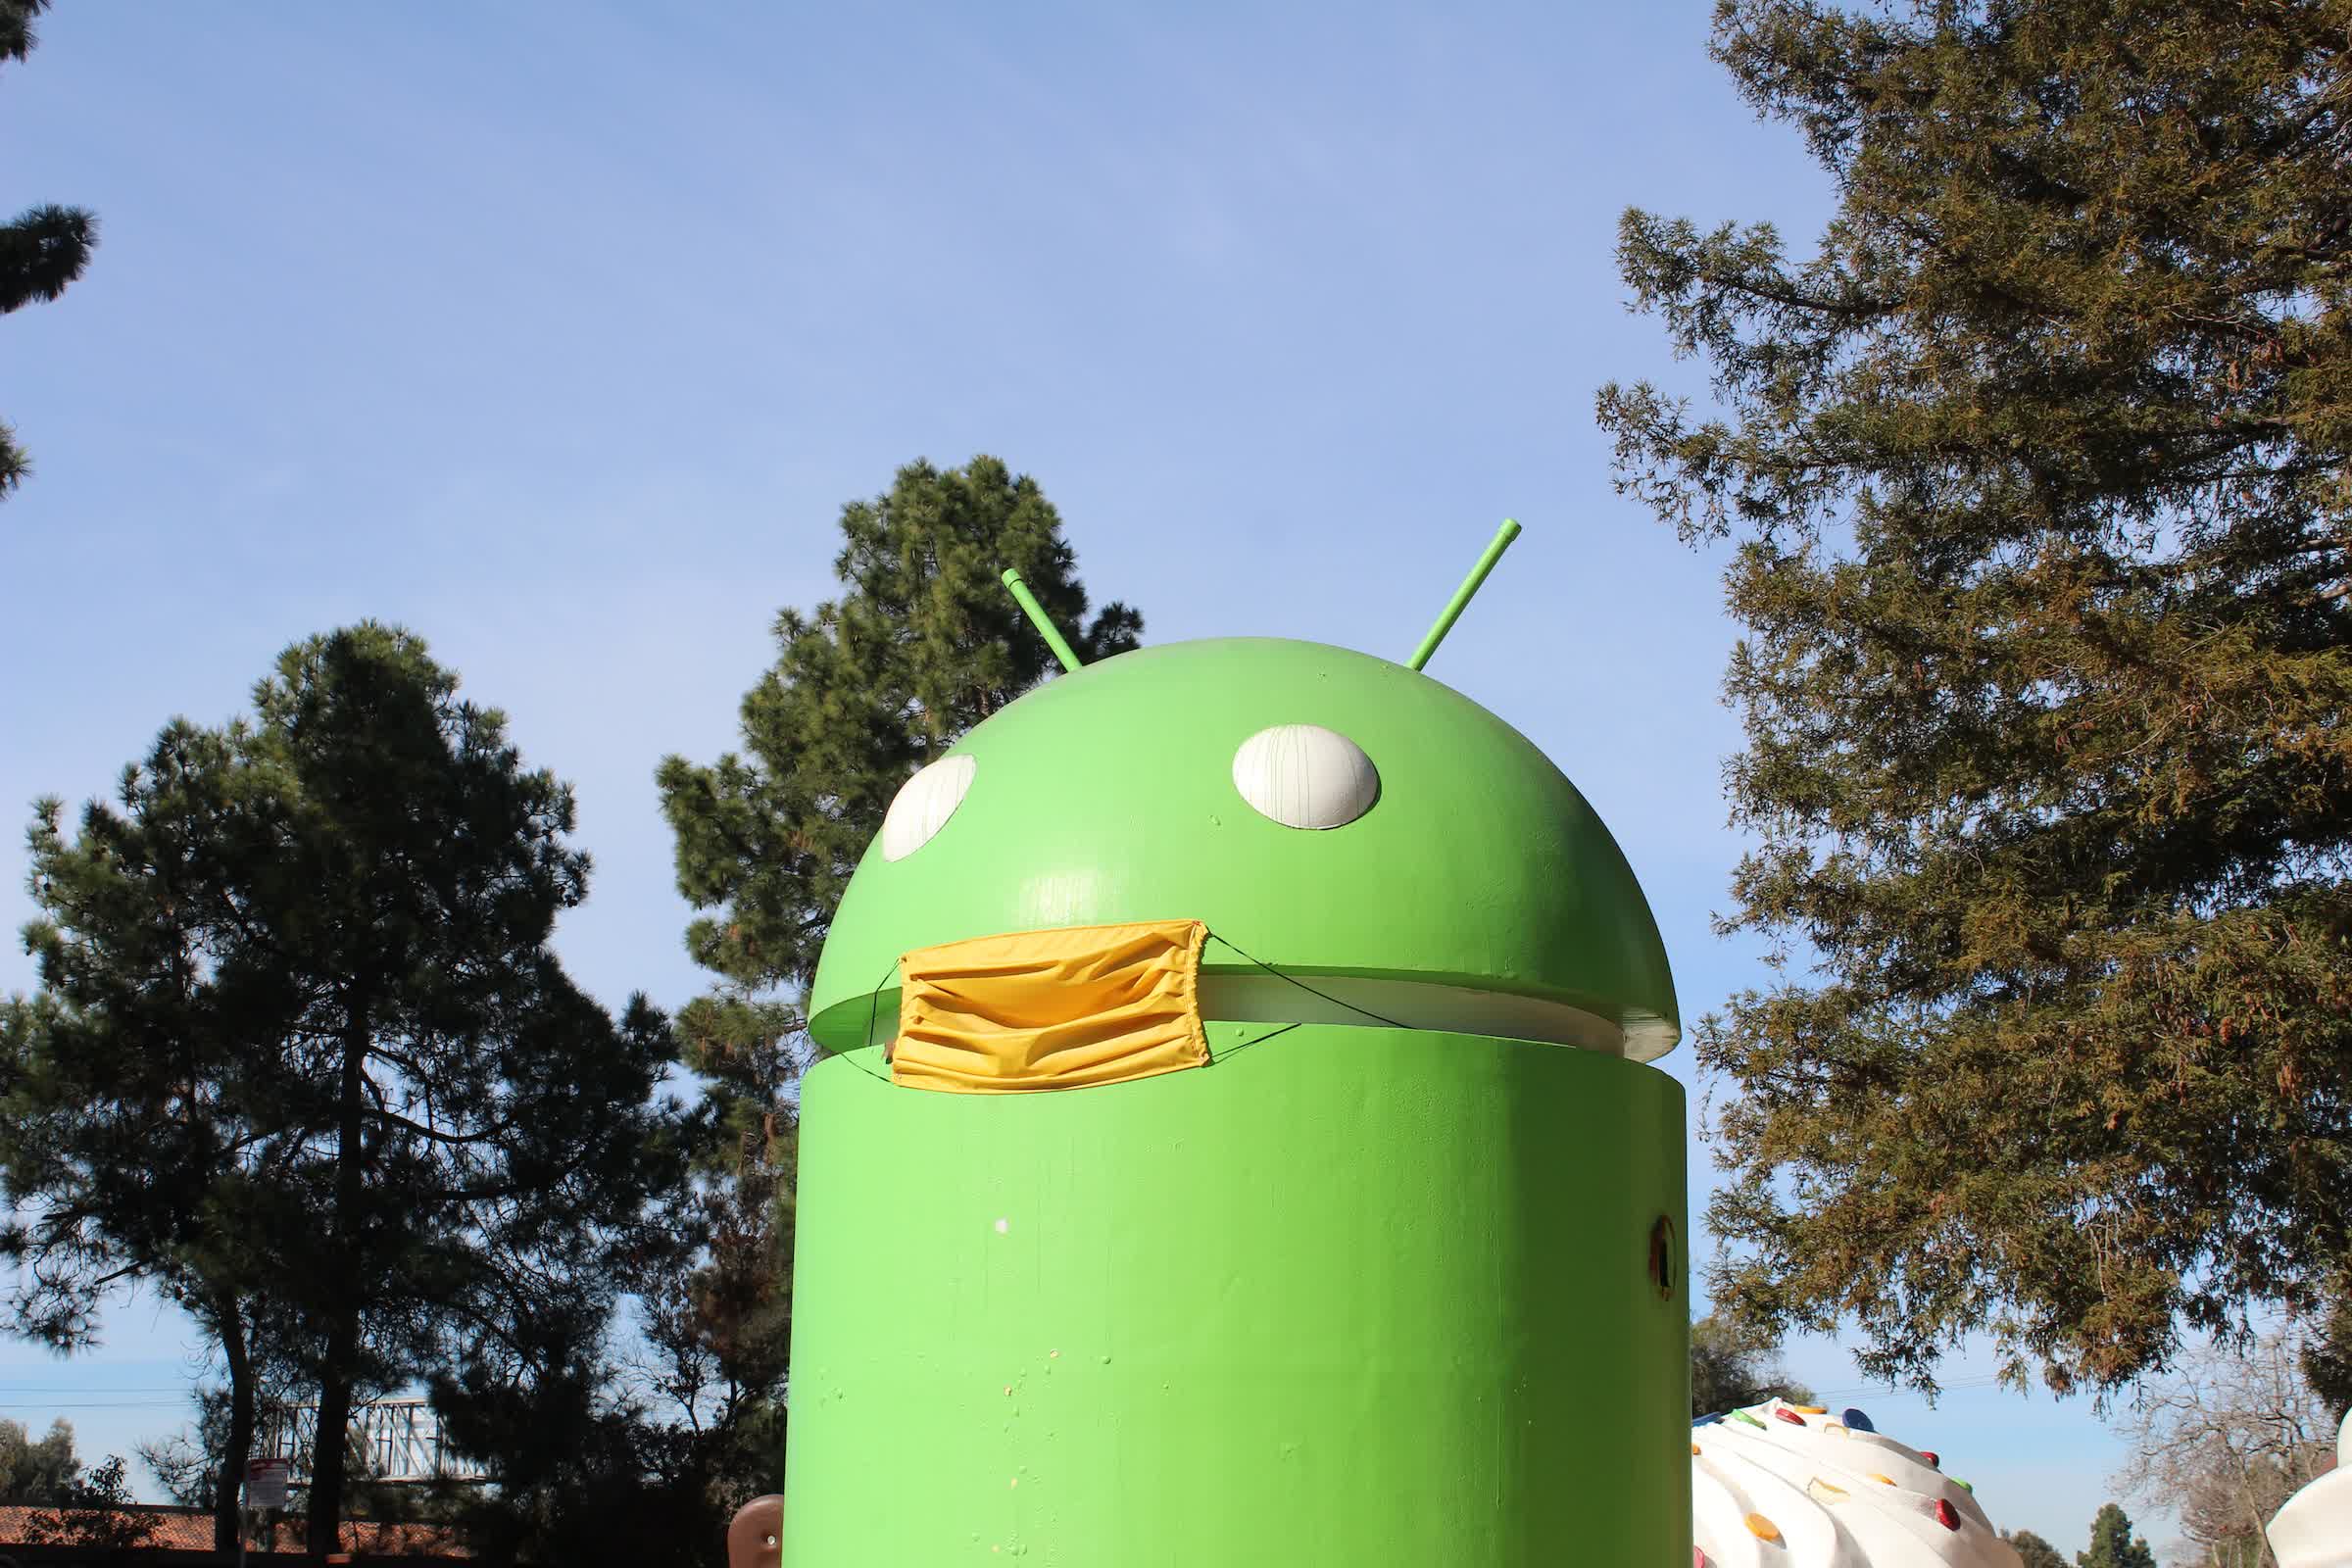 Millions of Android phones come with pre-installed malware, and there's no easy fix